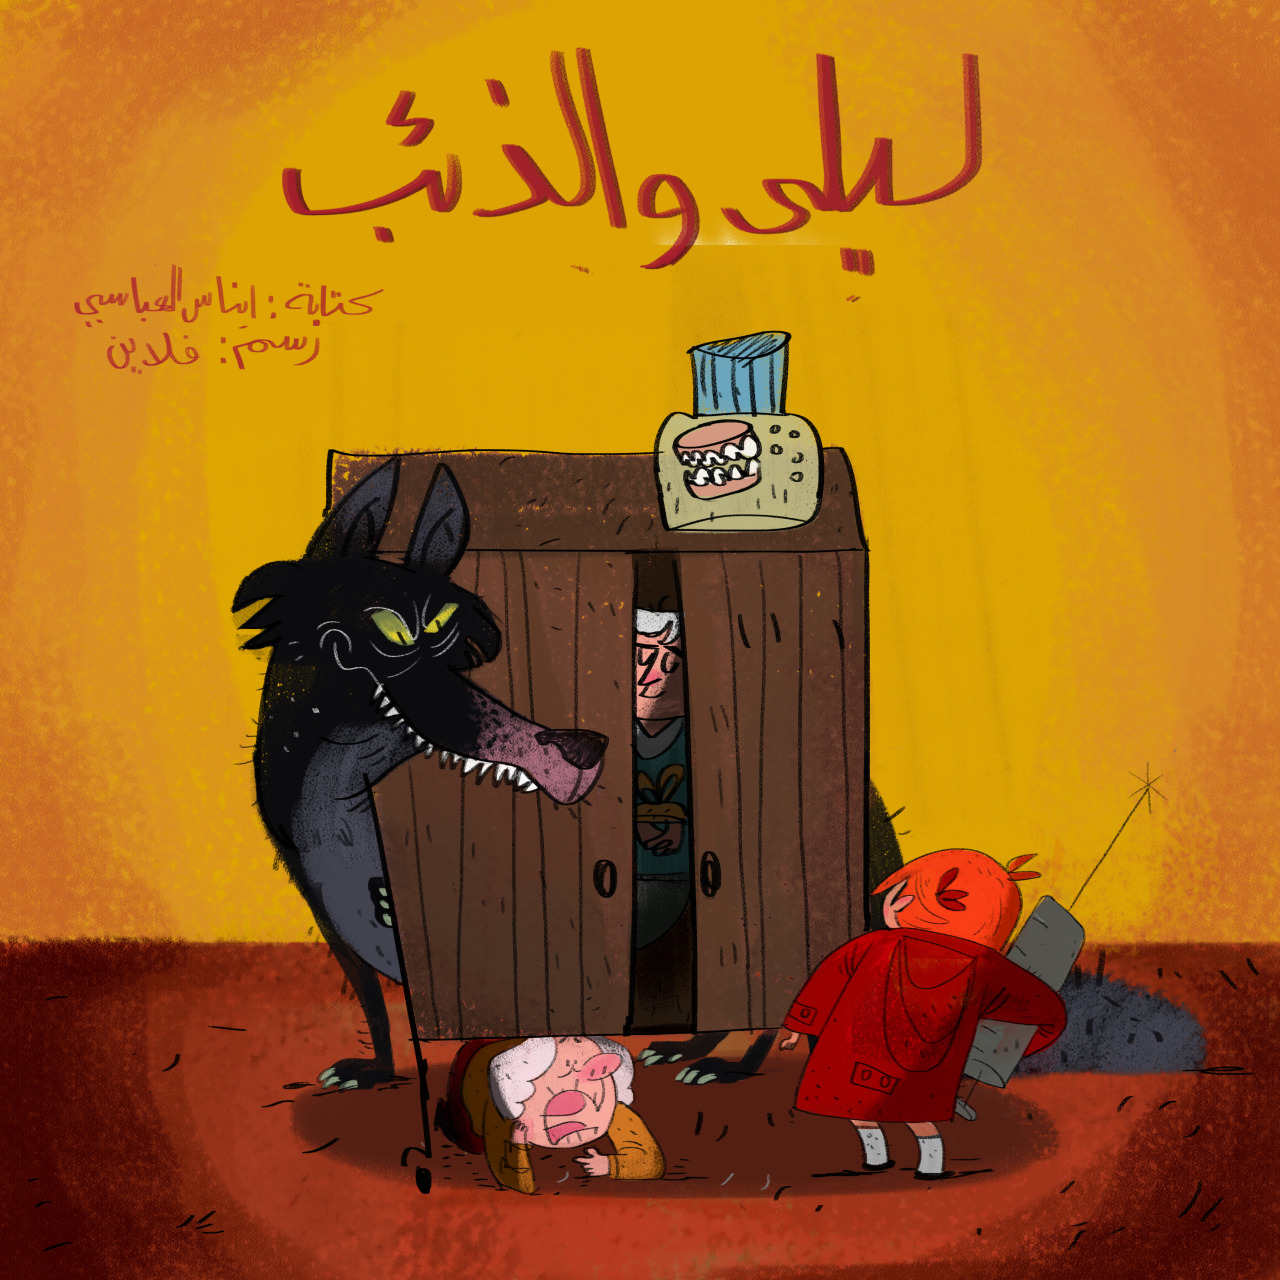 flyingmuti: Just finished illustrating children book” red riding hood” check